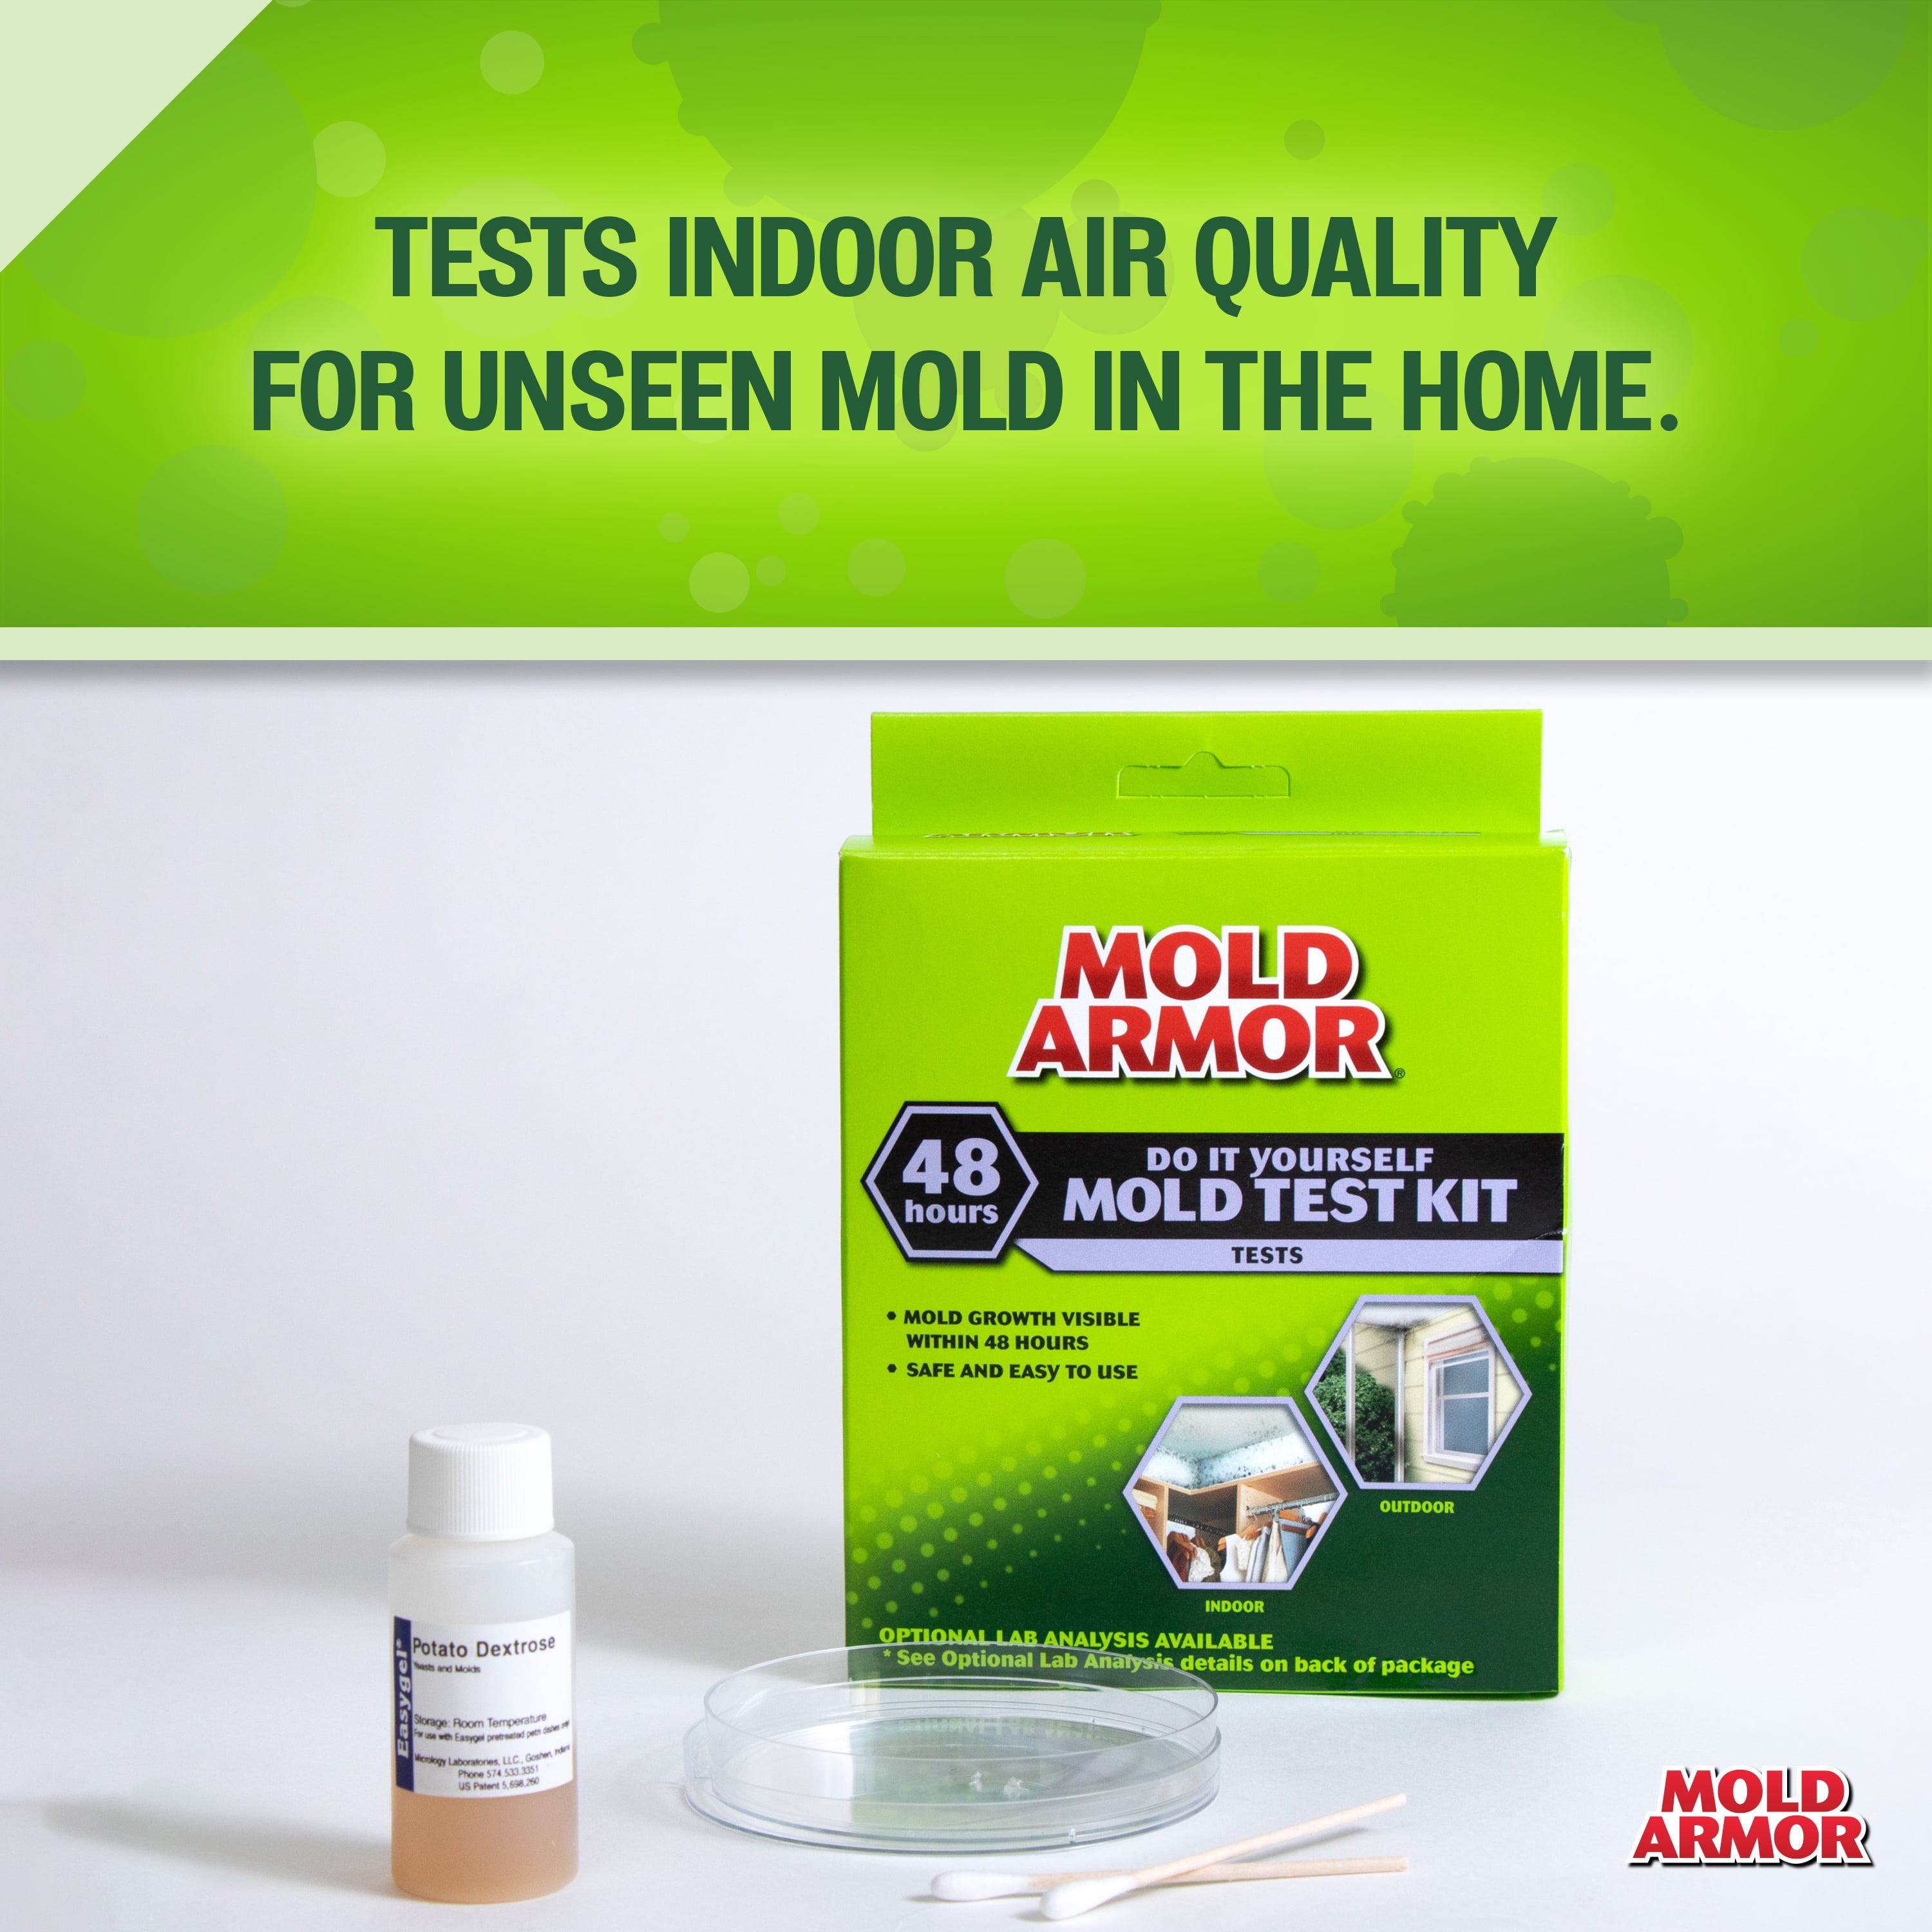 My House Test - DIY Mold Test Kit for Home - Quick 48-Hour Visible Results,  Air & Surface Analysis, Mold Testing Kit - Inclusive Lab Review, and